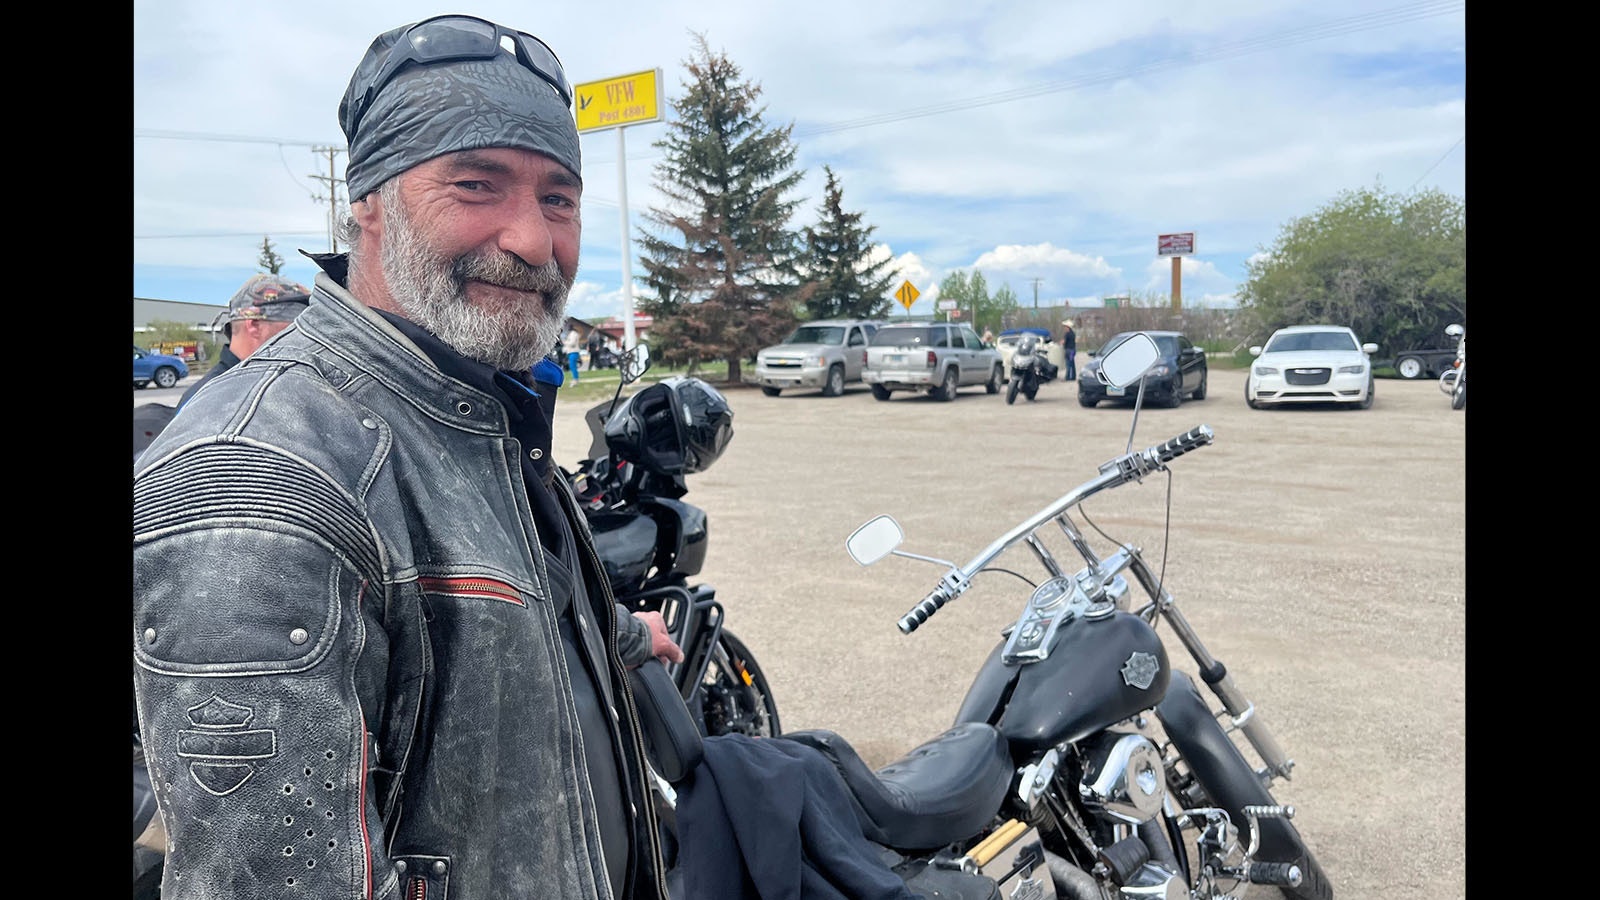 Heath Hetrick with "Alice," a 1991 Shoveled Harley-Davidson owned by Jim "Crash" Newman, a Pinedale motorcyclist who died by suicide. Hetrick rode Newman's hog in memory of his friend in the Boulder Poker Run.